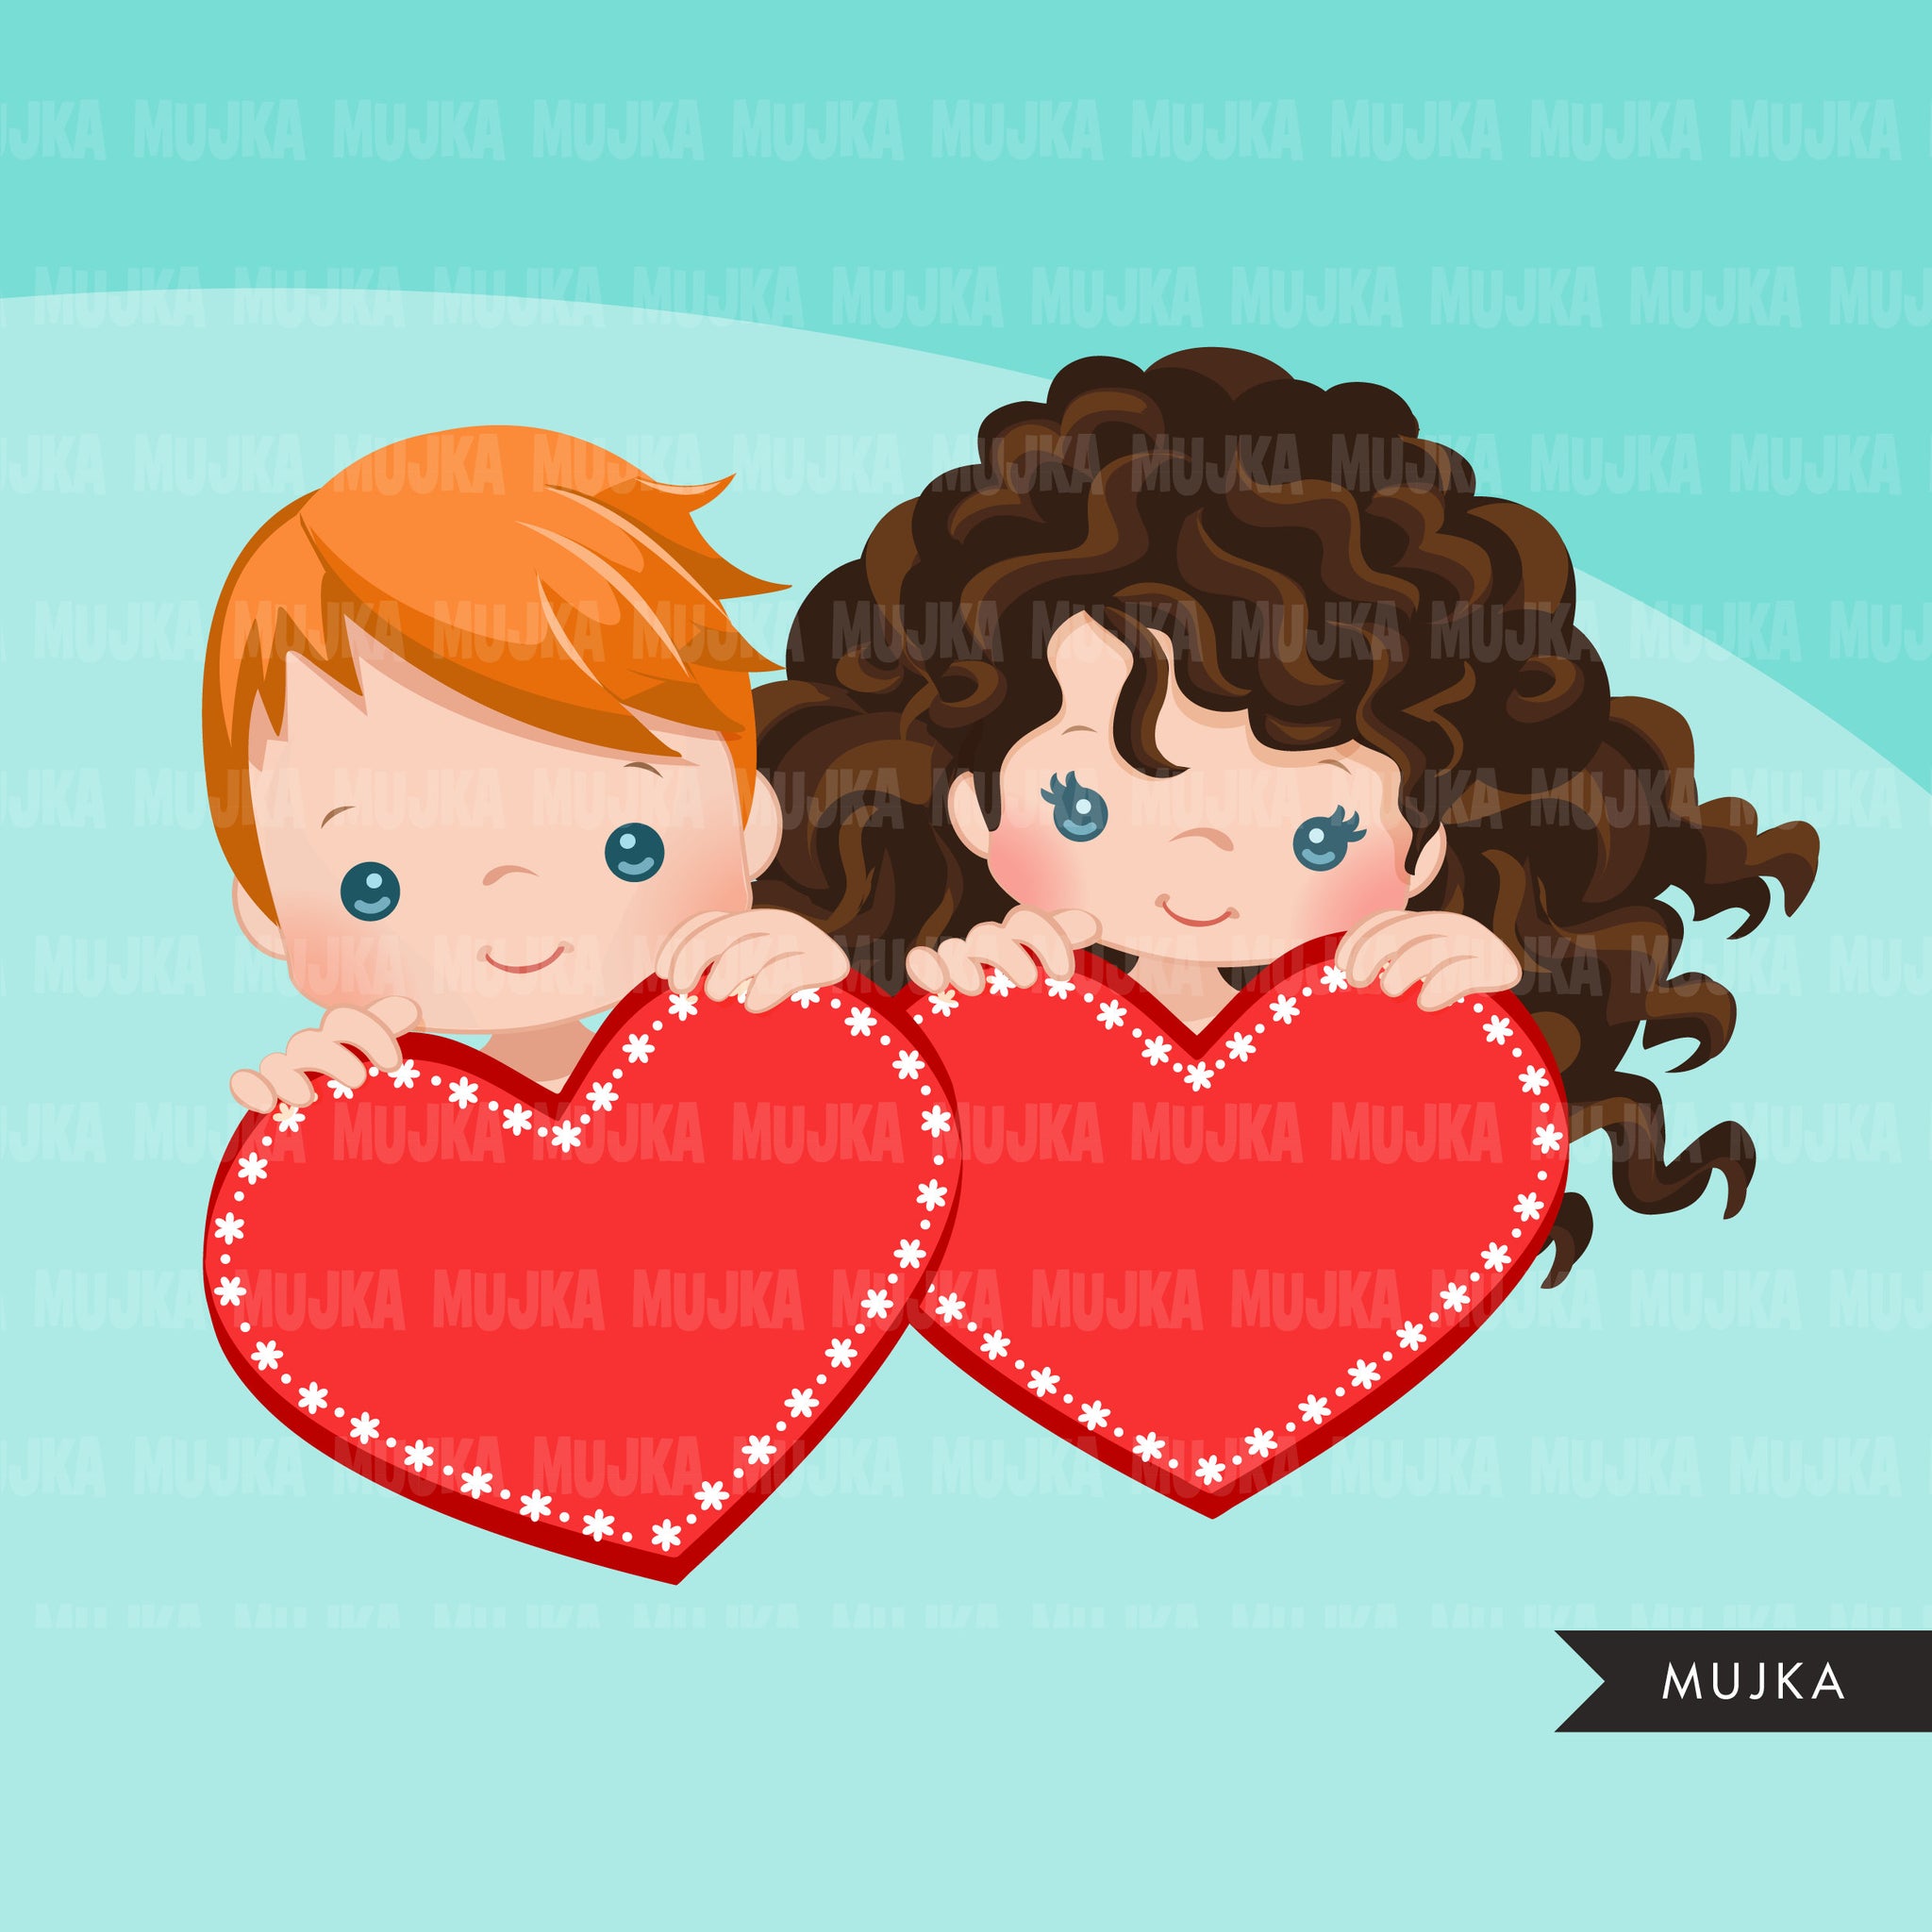 Valentine Clipart, peeking kids BUNDLE, Valentine's Day boys, girls, valentine gifts, commercial use graphics, png clip art